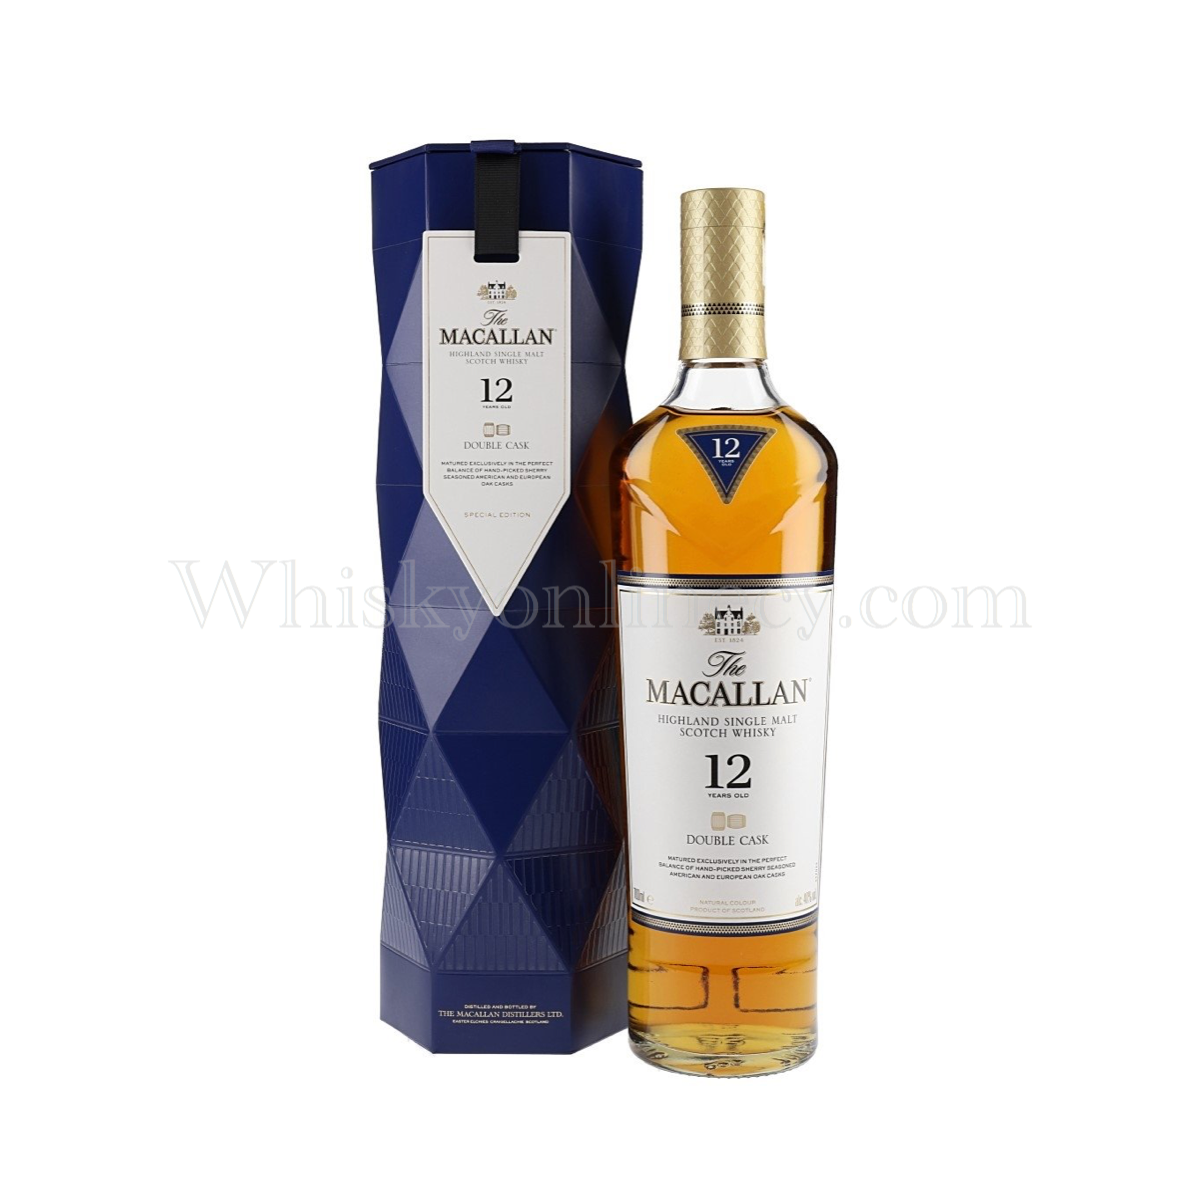 Whisky Online Cyprus - Macallan 12 Year Old Double Cask 2019 Xmas Gifting  Edition (70cl, 40%)